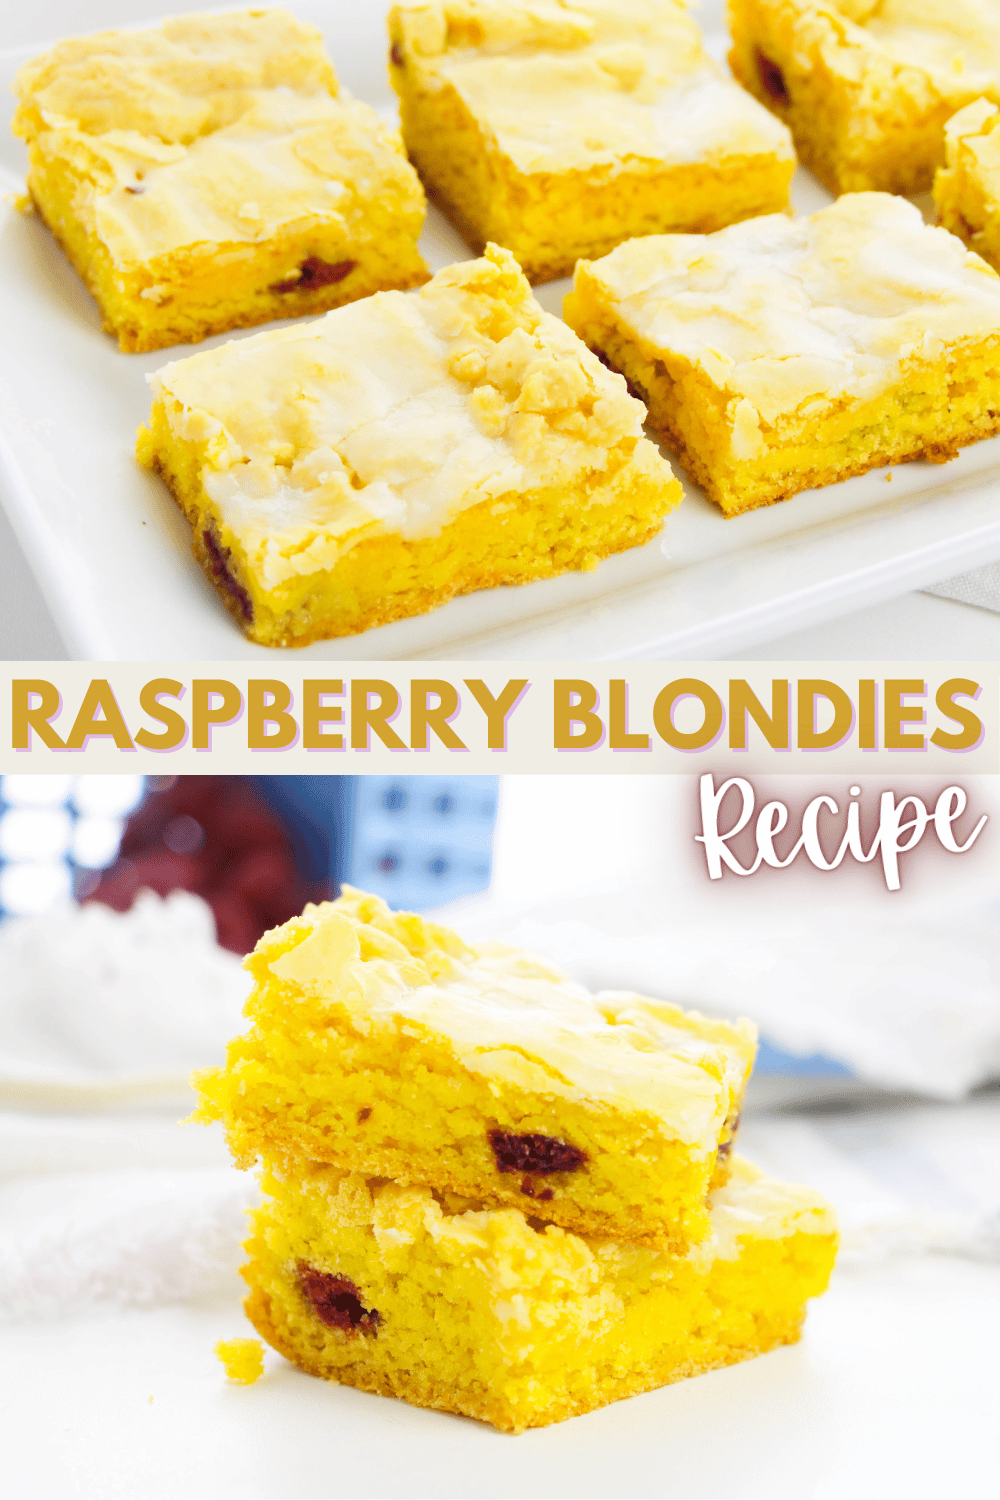 This raspberry blondies recipe is the perfect sweet and tart treat for summer. The chewy blondies will be a hit with friends and family. #raspberryblondiesrecipe #raspberryblondies #recipe #raspberry #blondies via @wondermomwannab